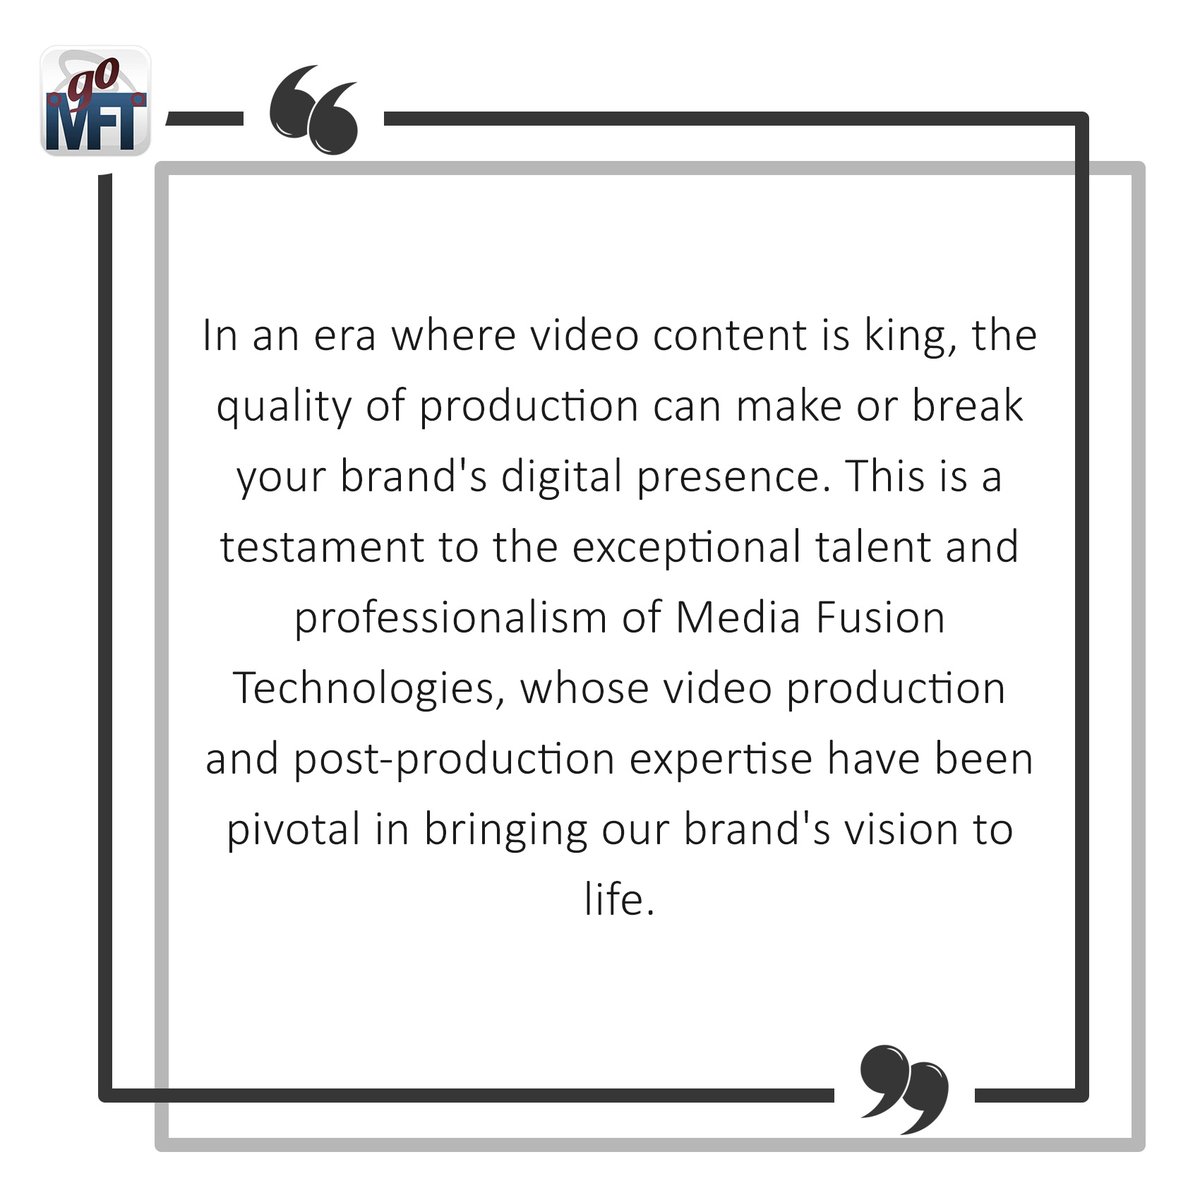 We are continually humbled and honored by the kind comments that our customers share. Our sincere gratitude to you! #Testimonial
__
Winning #ContentMarketing & killer #WebsiteDevelopment globally since 1986
#goMFT
877-554-6638 | goMFT.com